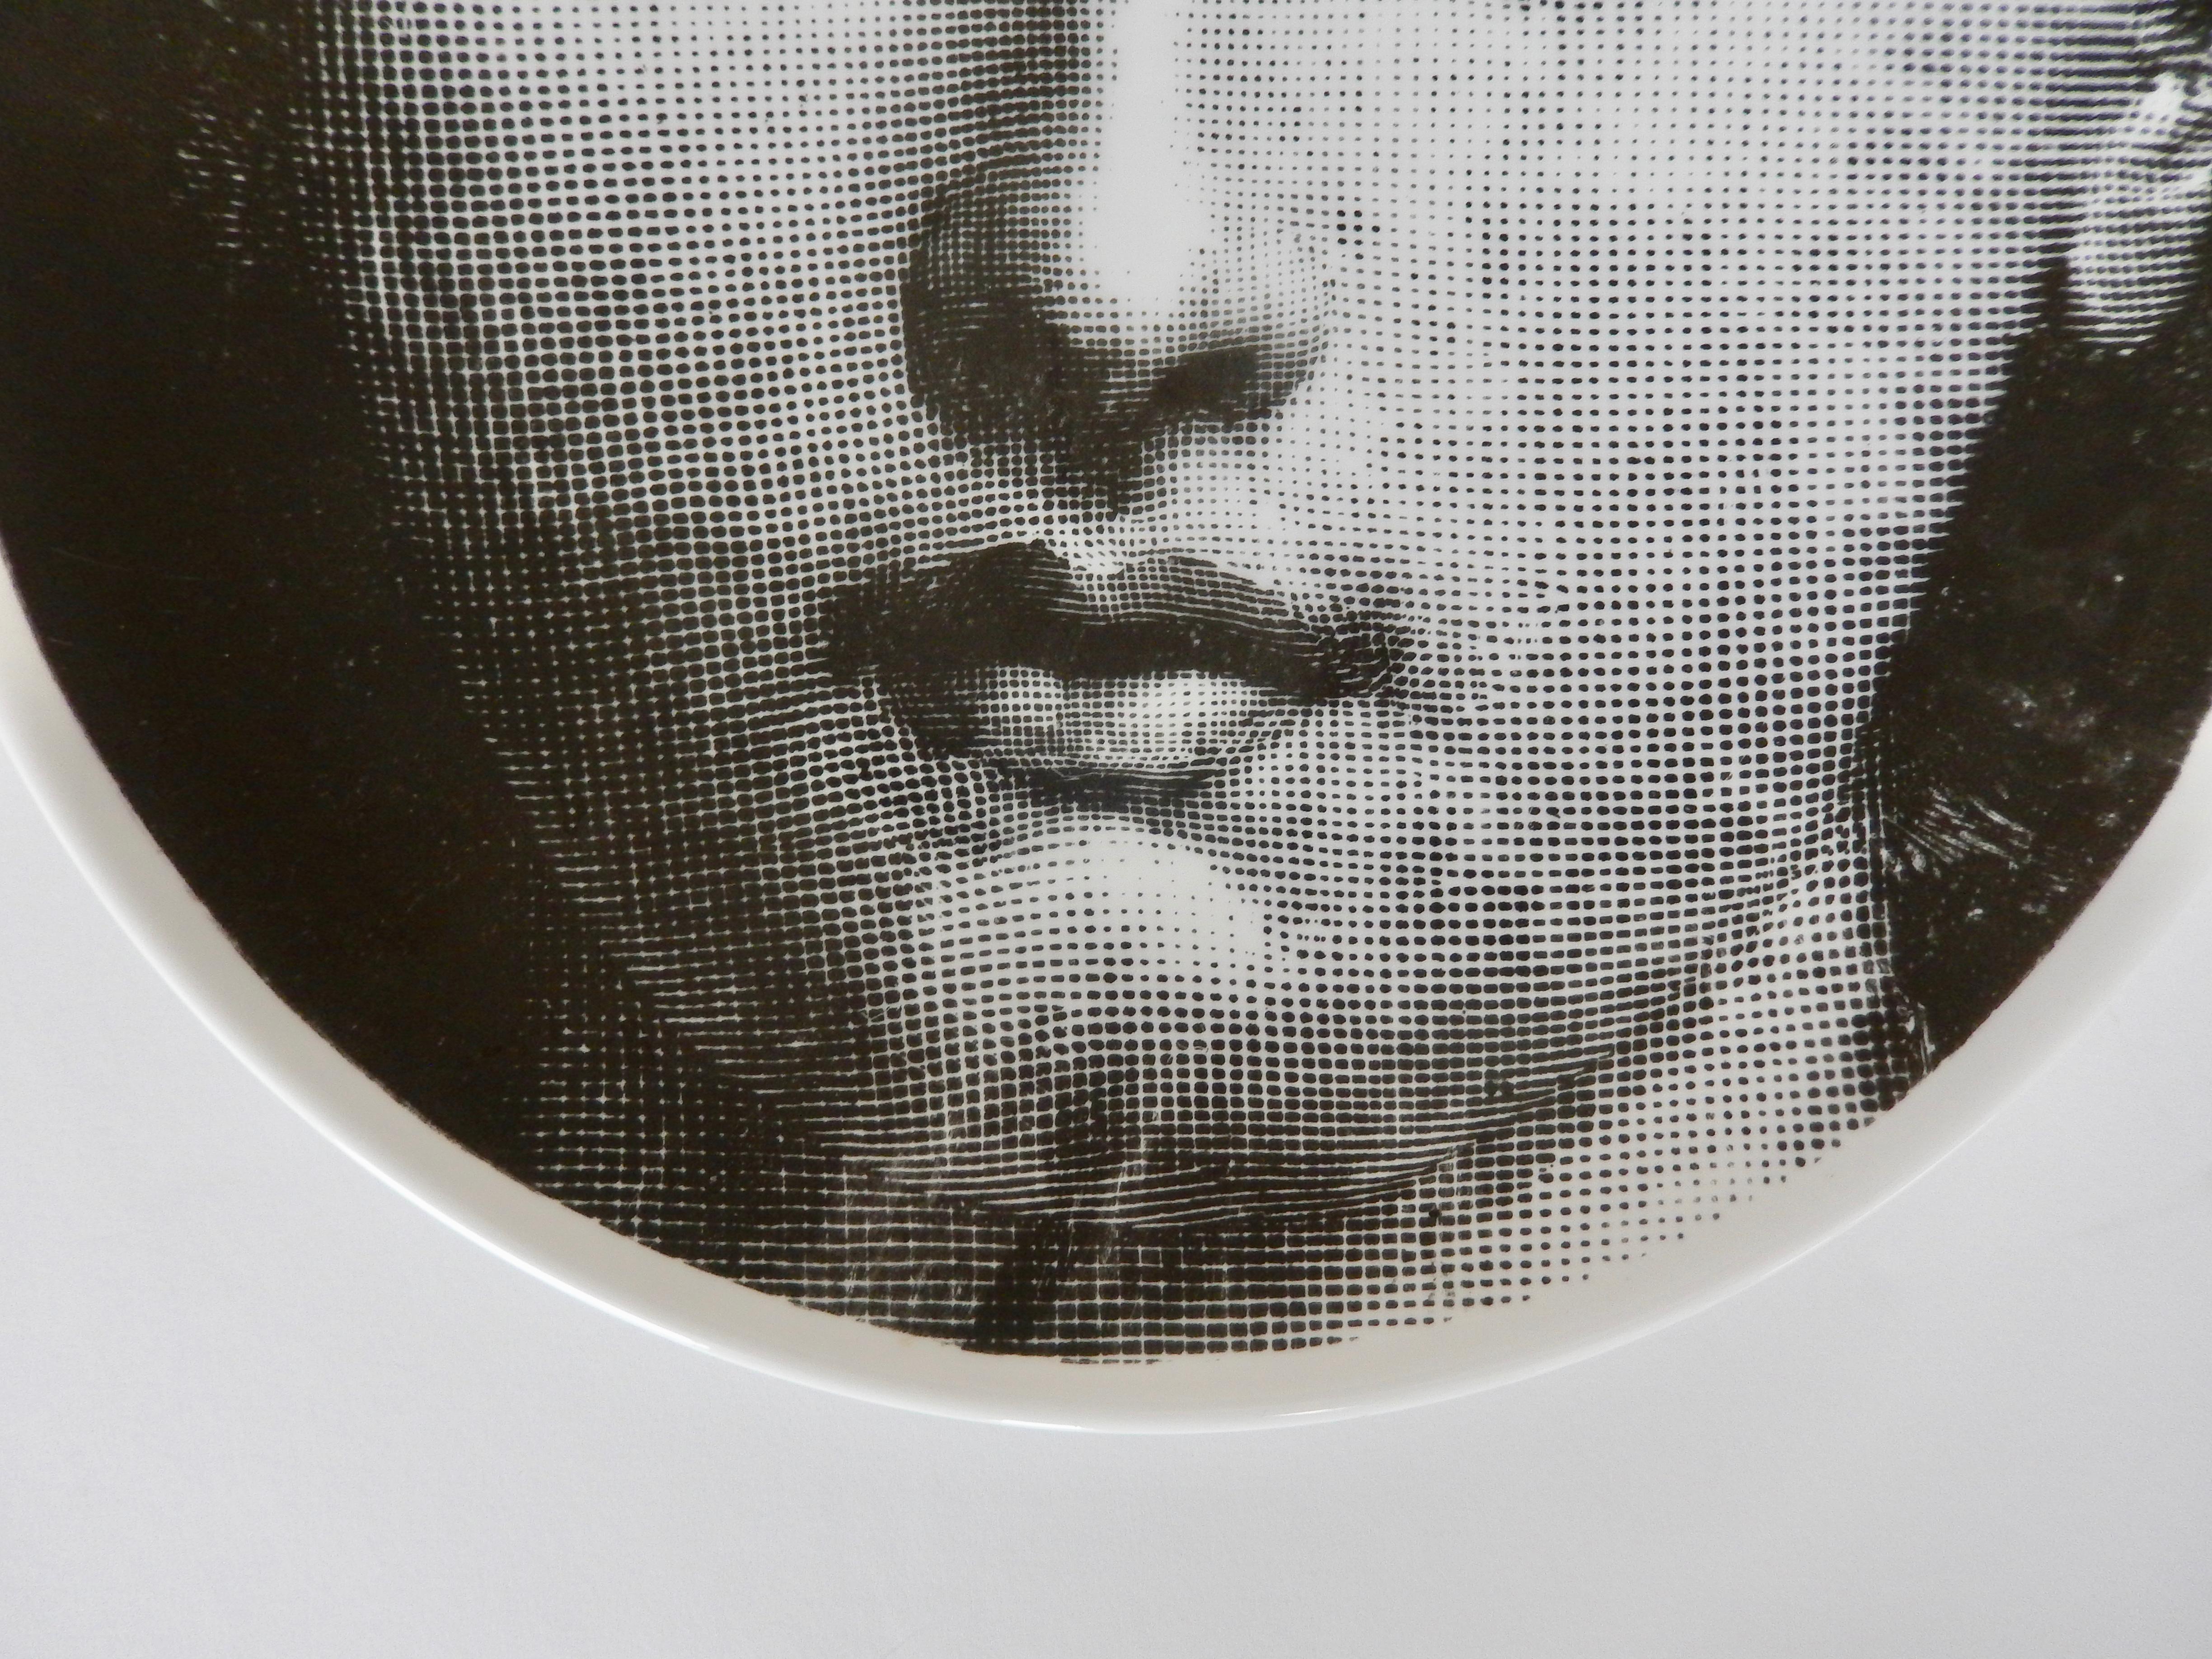 Mid-Century Modern Midcentury Fornasetti Iconic Face Plate, Tema e Variazoni N1 For Sale